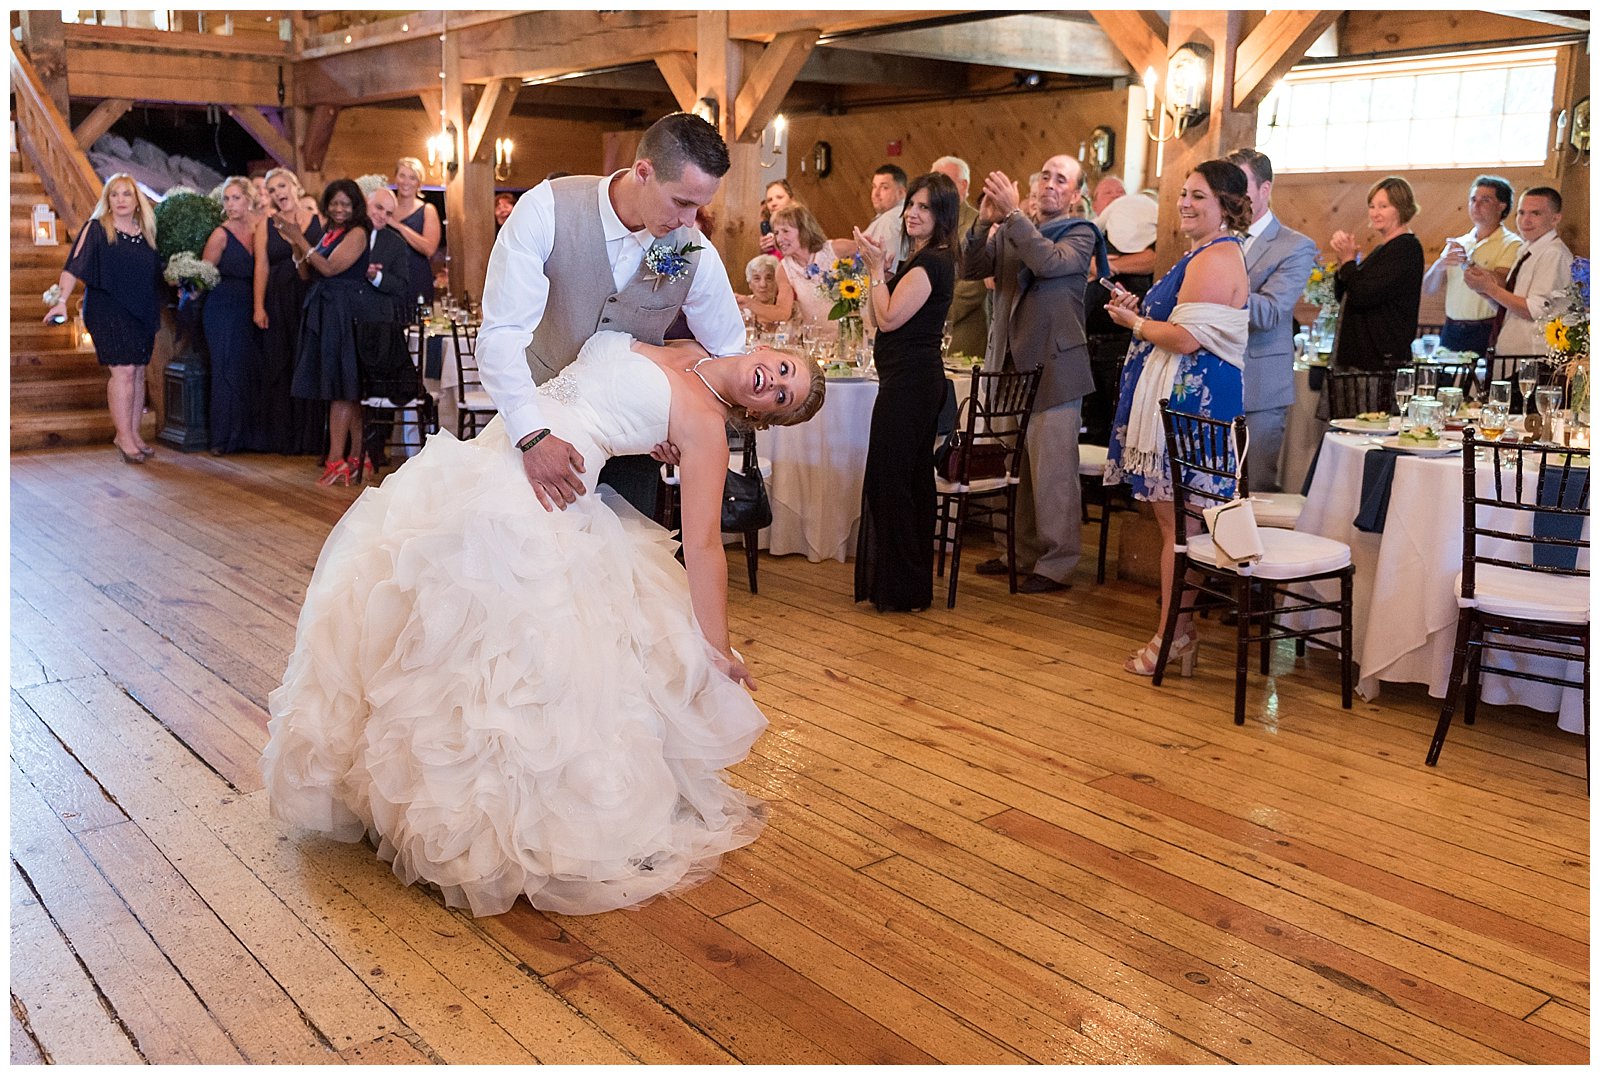 Groom dips bride during their first dance at their red lion inn wedding on the south shore of Massachusetts